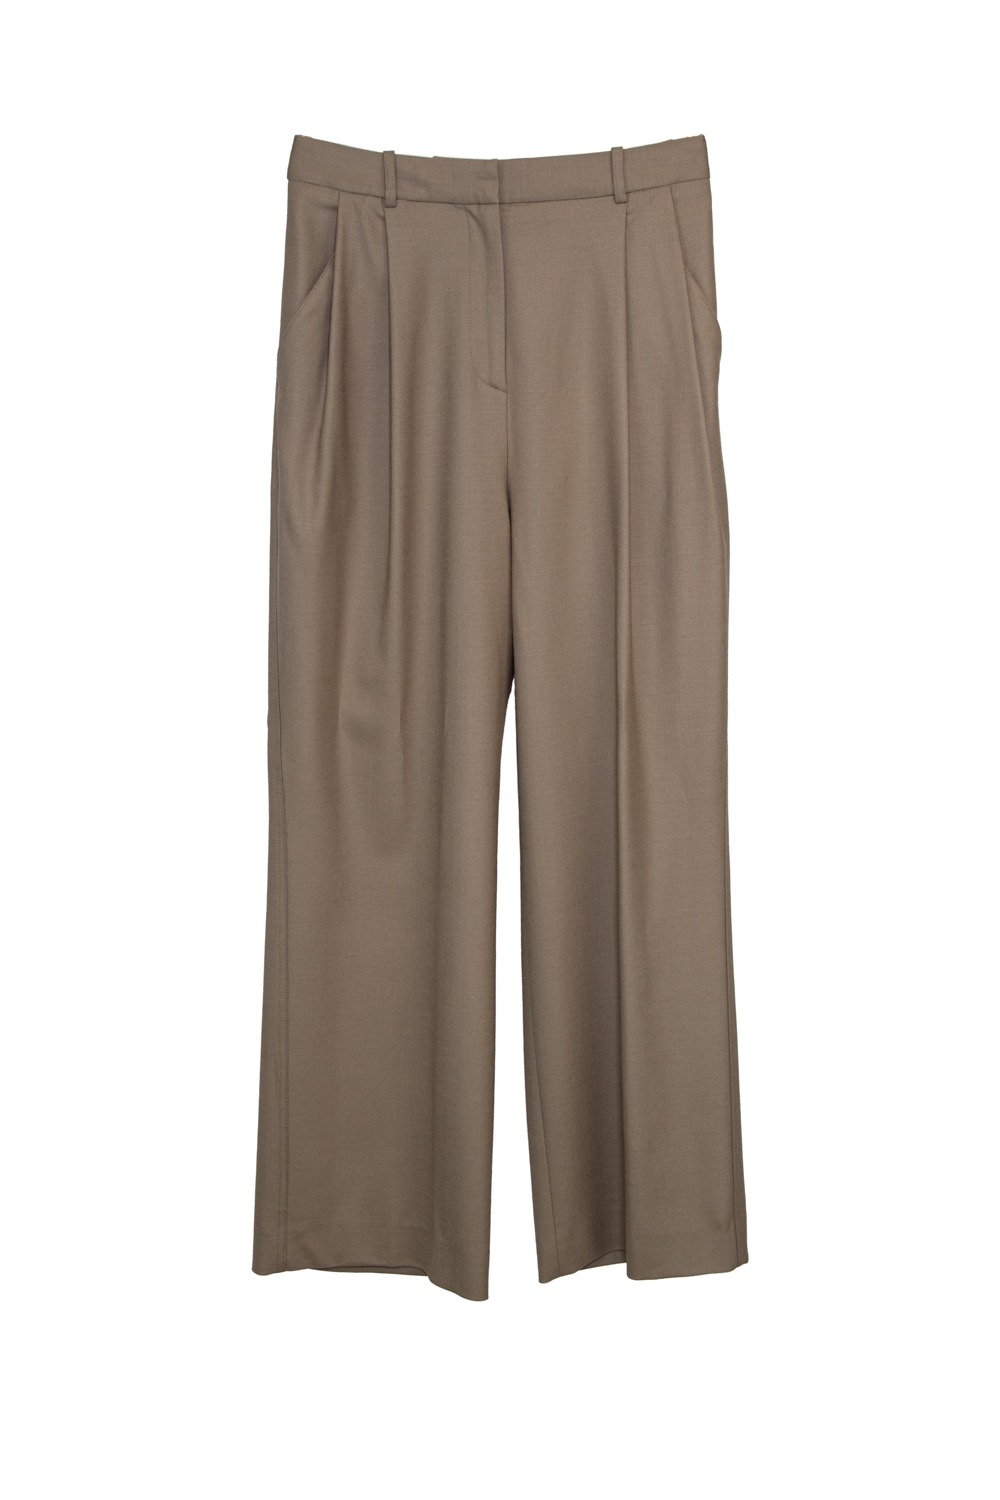 Loulou Studio Weite Wollhose in Taupe